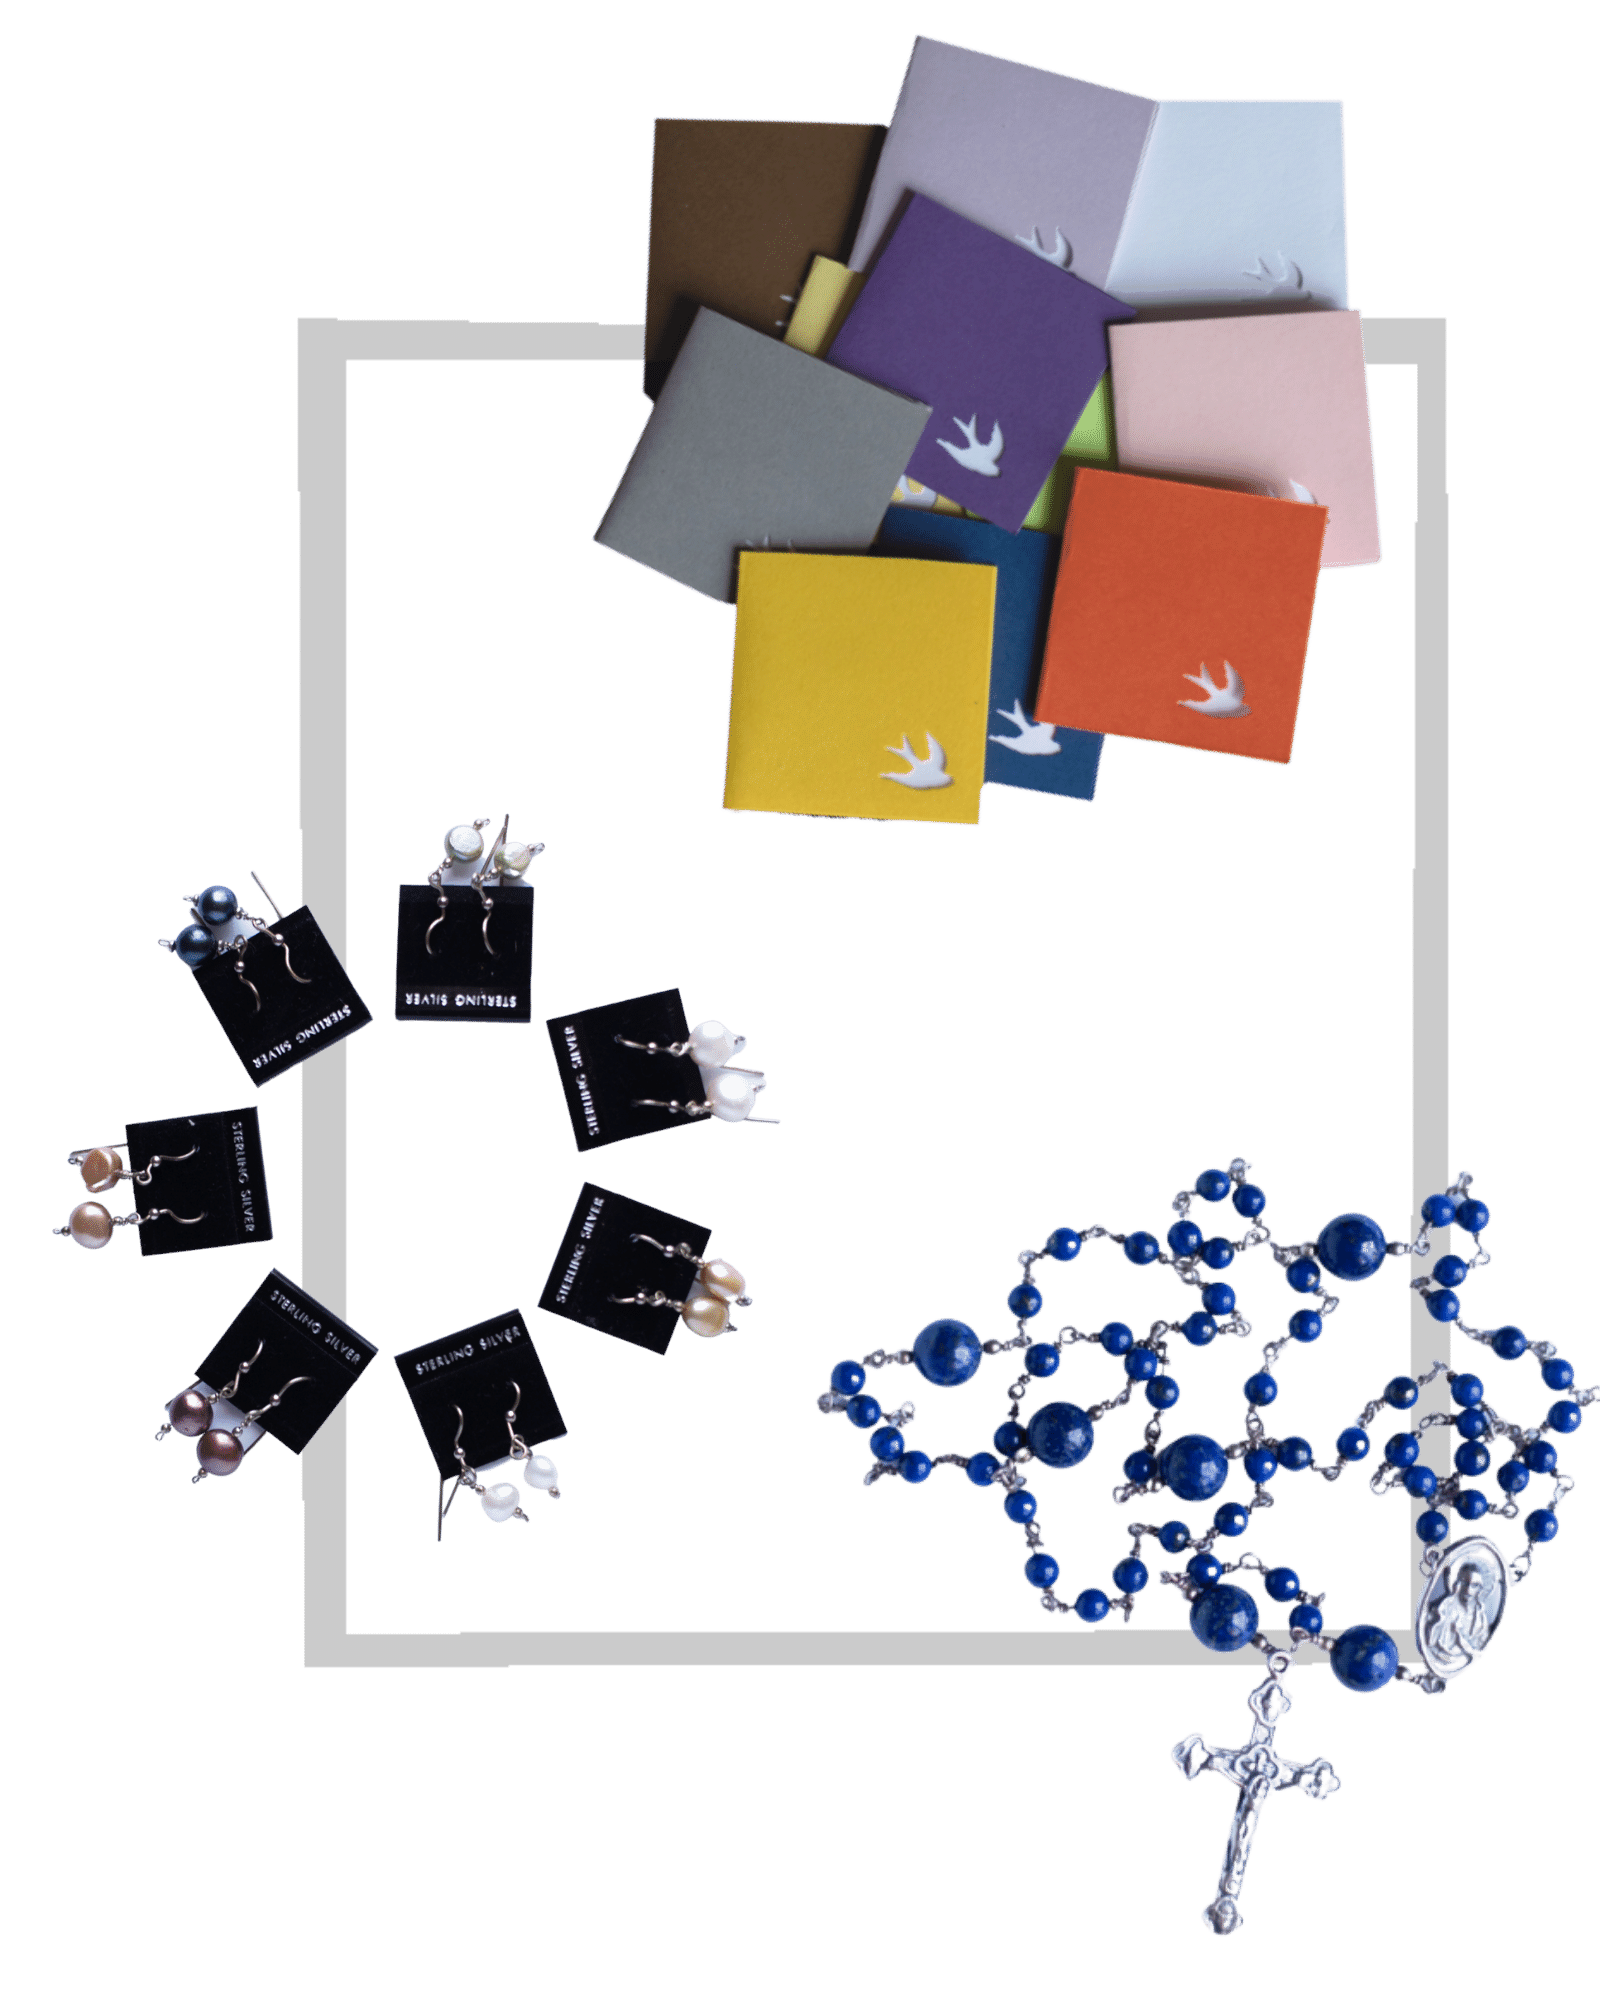 Photo shows several 2 inch by 2 inch notecards with a bird punch in the corner, a ring of seven pairs of freshwater pearl earrings, and a lapis rosary arranged on a gray gingham background.